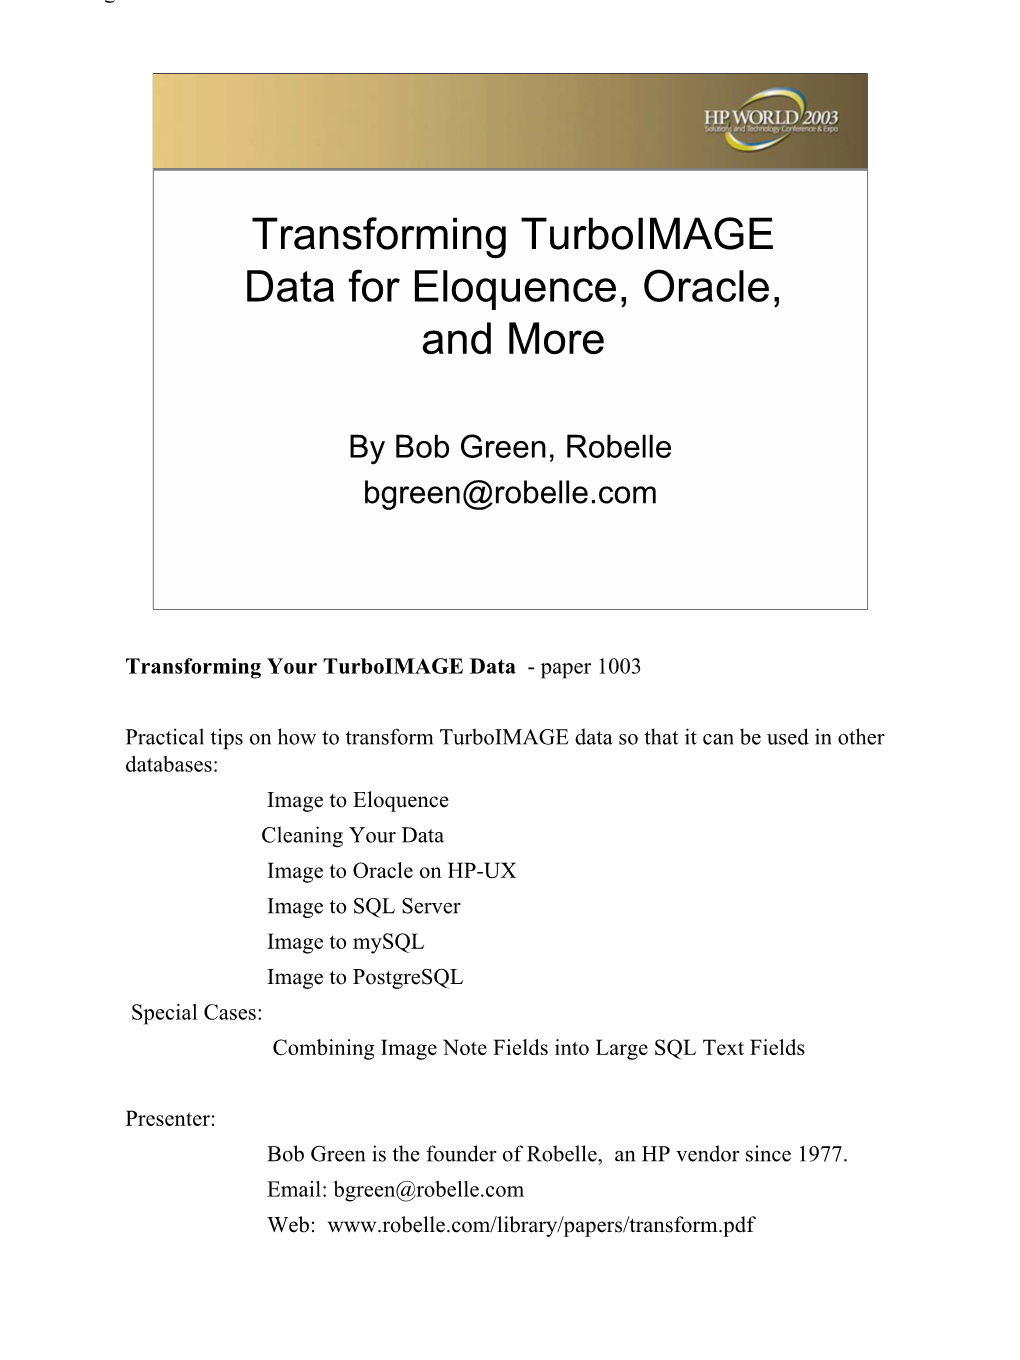 Transforming Turboimage Data for Eloquence, Oracle, and More